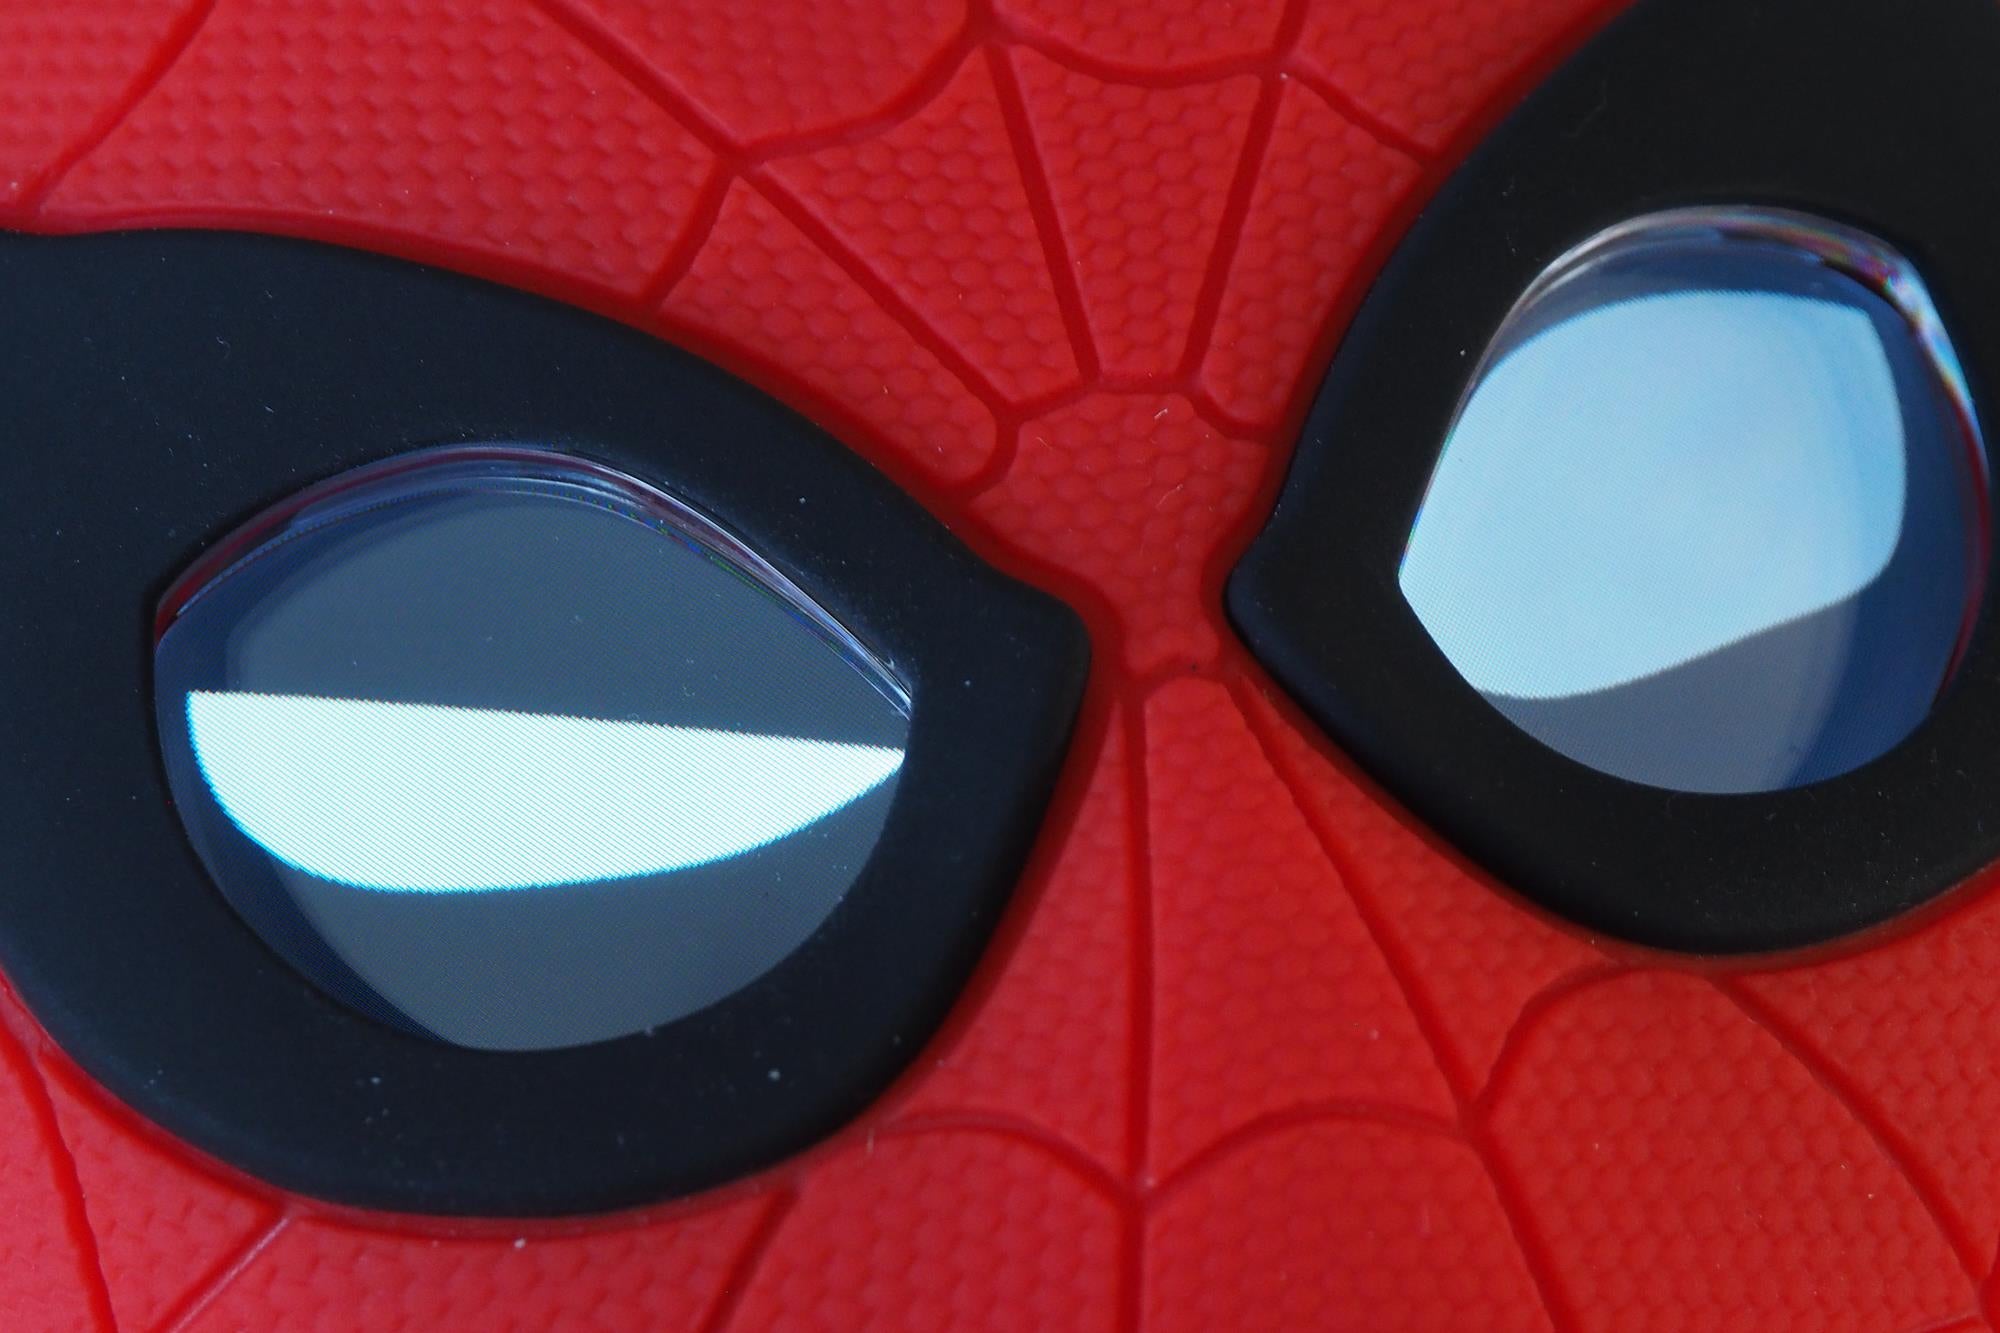 Close-up of Sphero Spider-Man interactive toy's eyes.